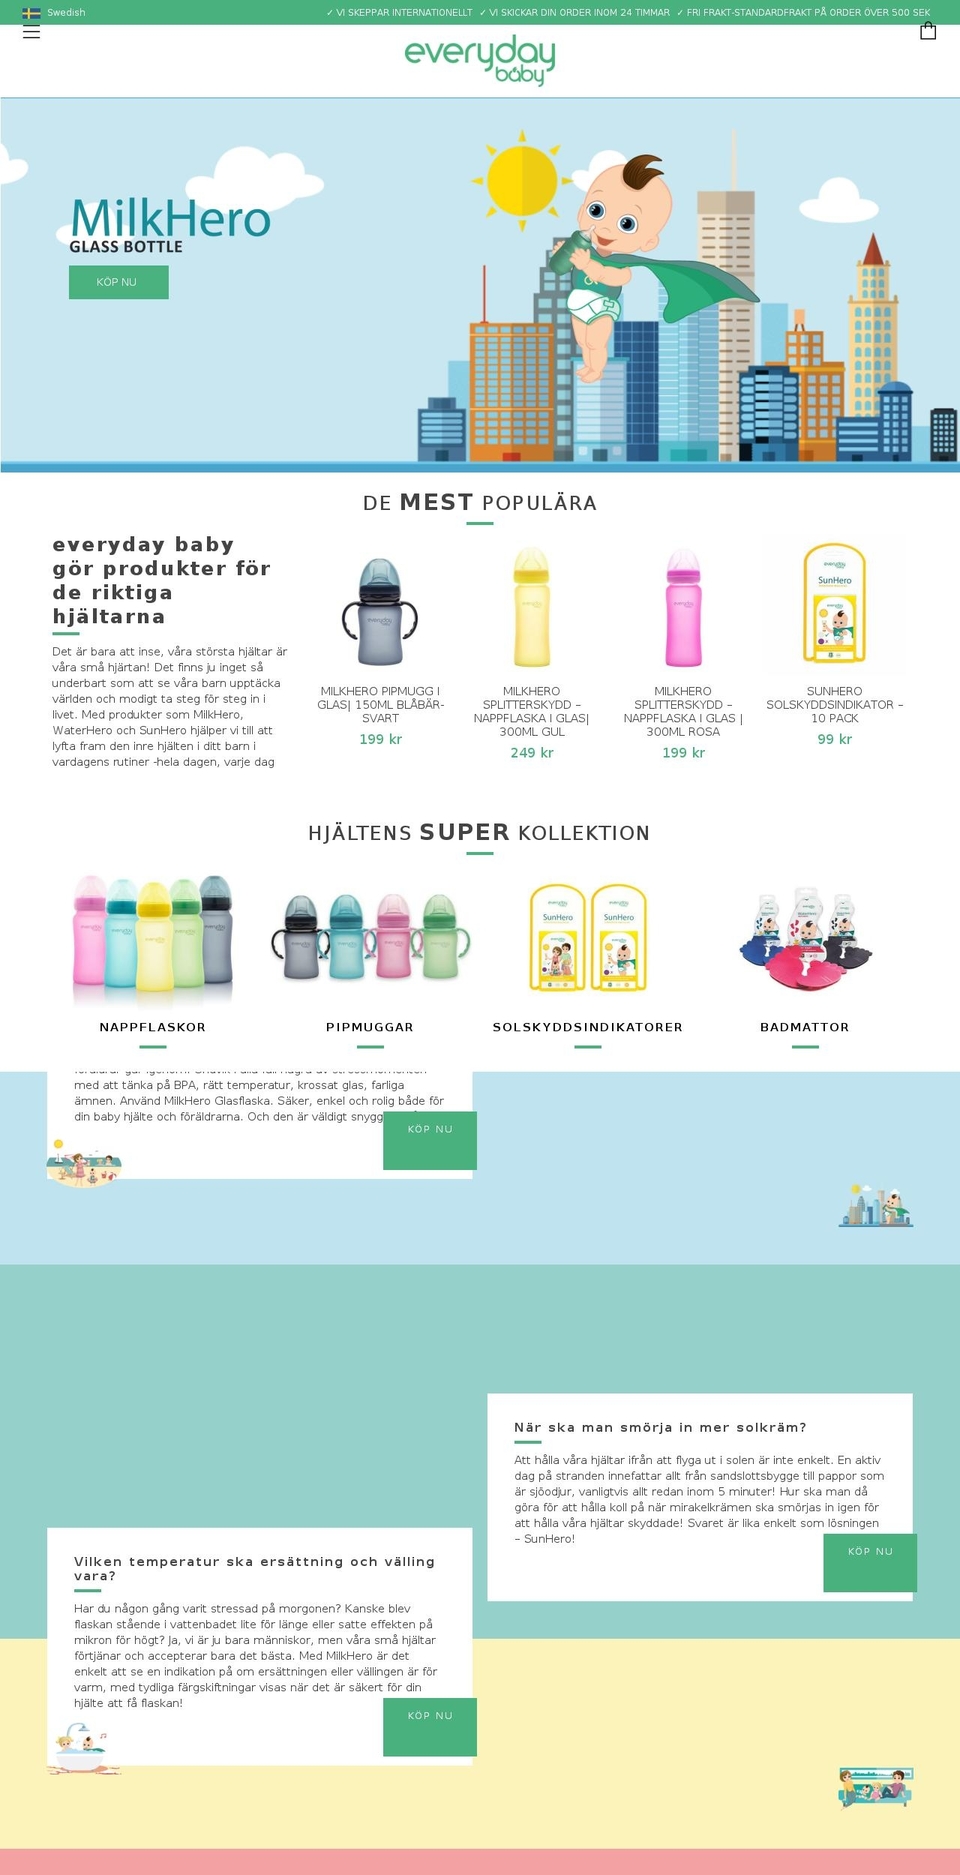 Copy of theme-export-everydaybaby-com-live-1-0-... Shopify theme site example everydaybaby.se